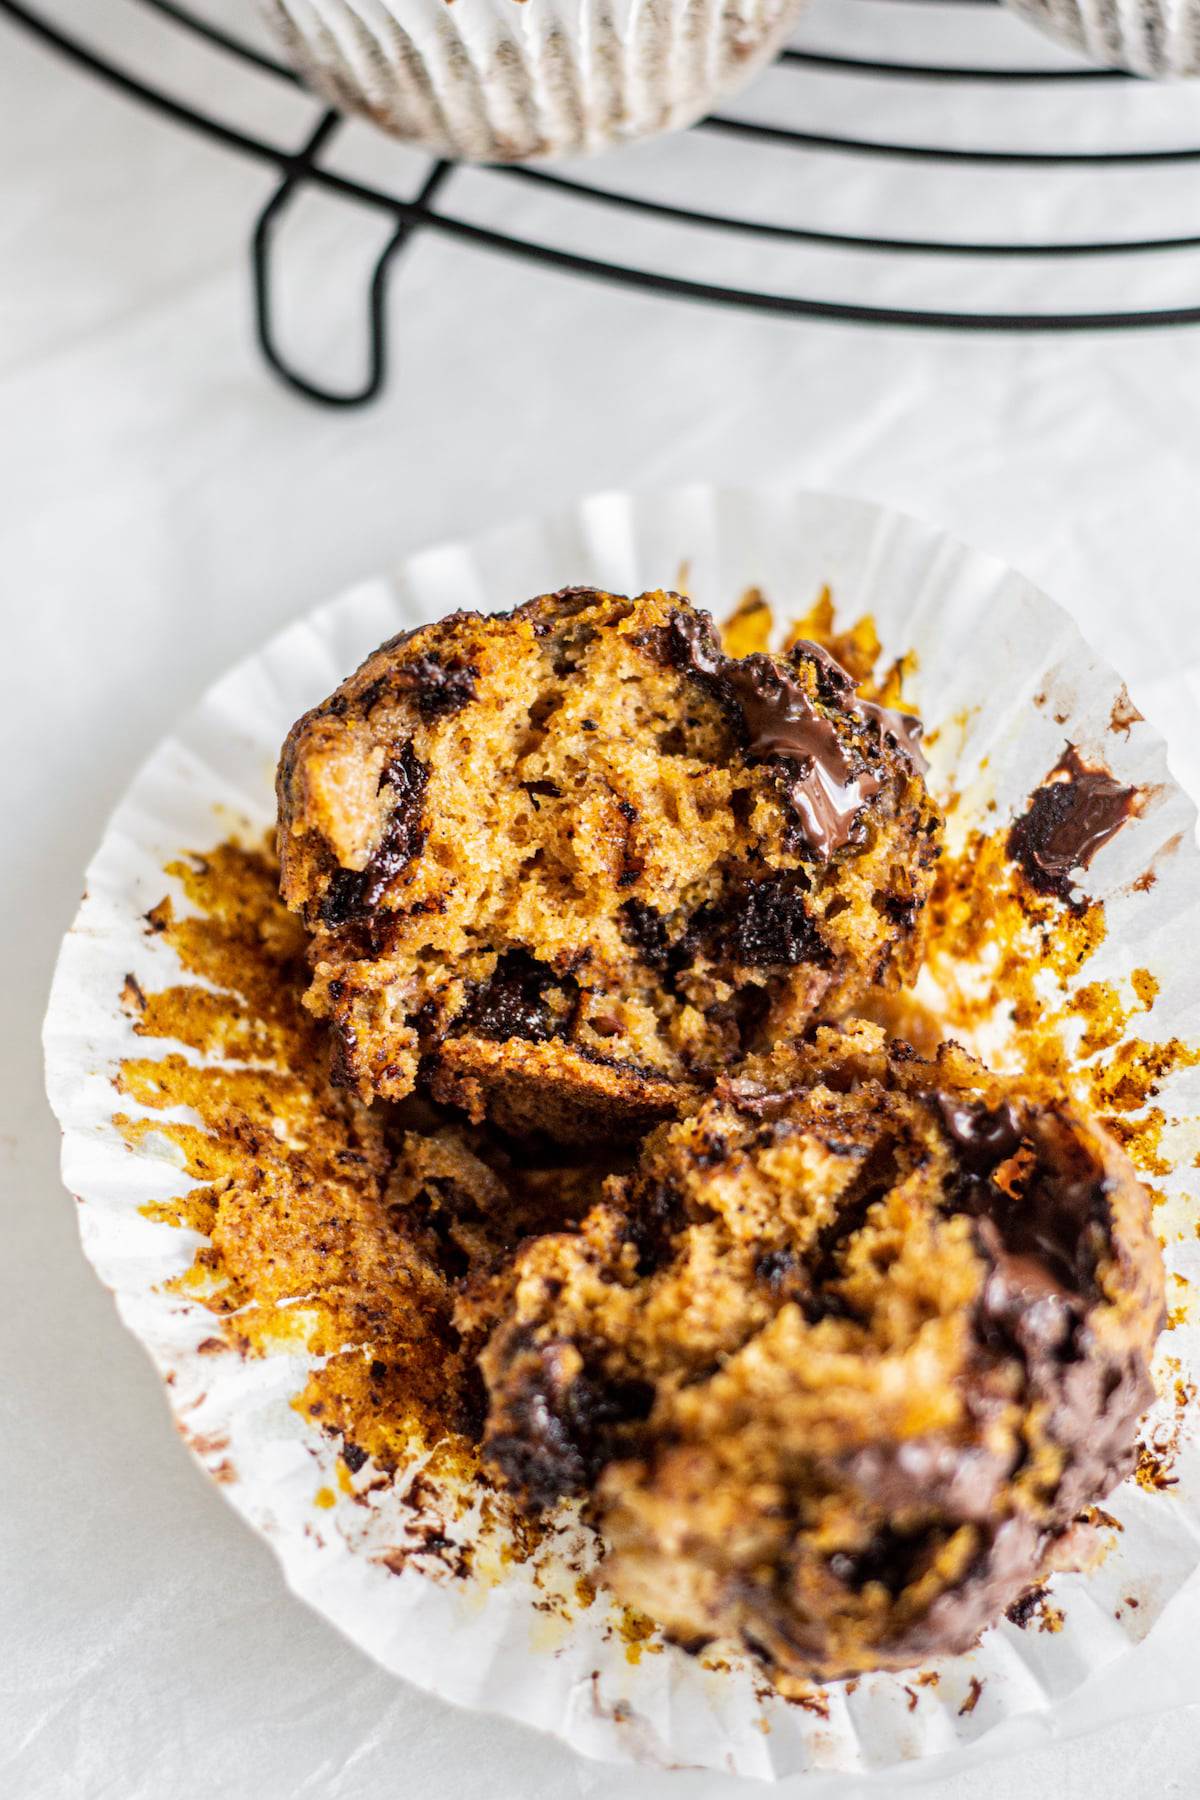 a broken muffin with melted chocolate.